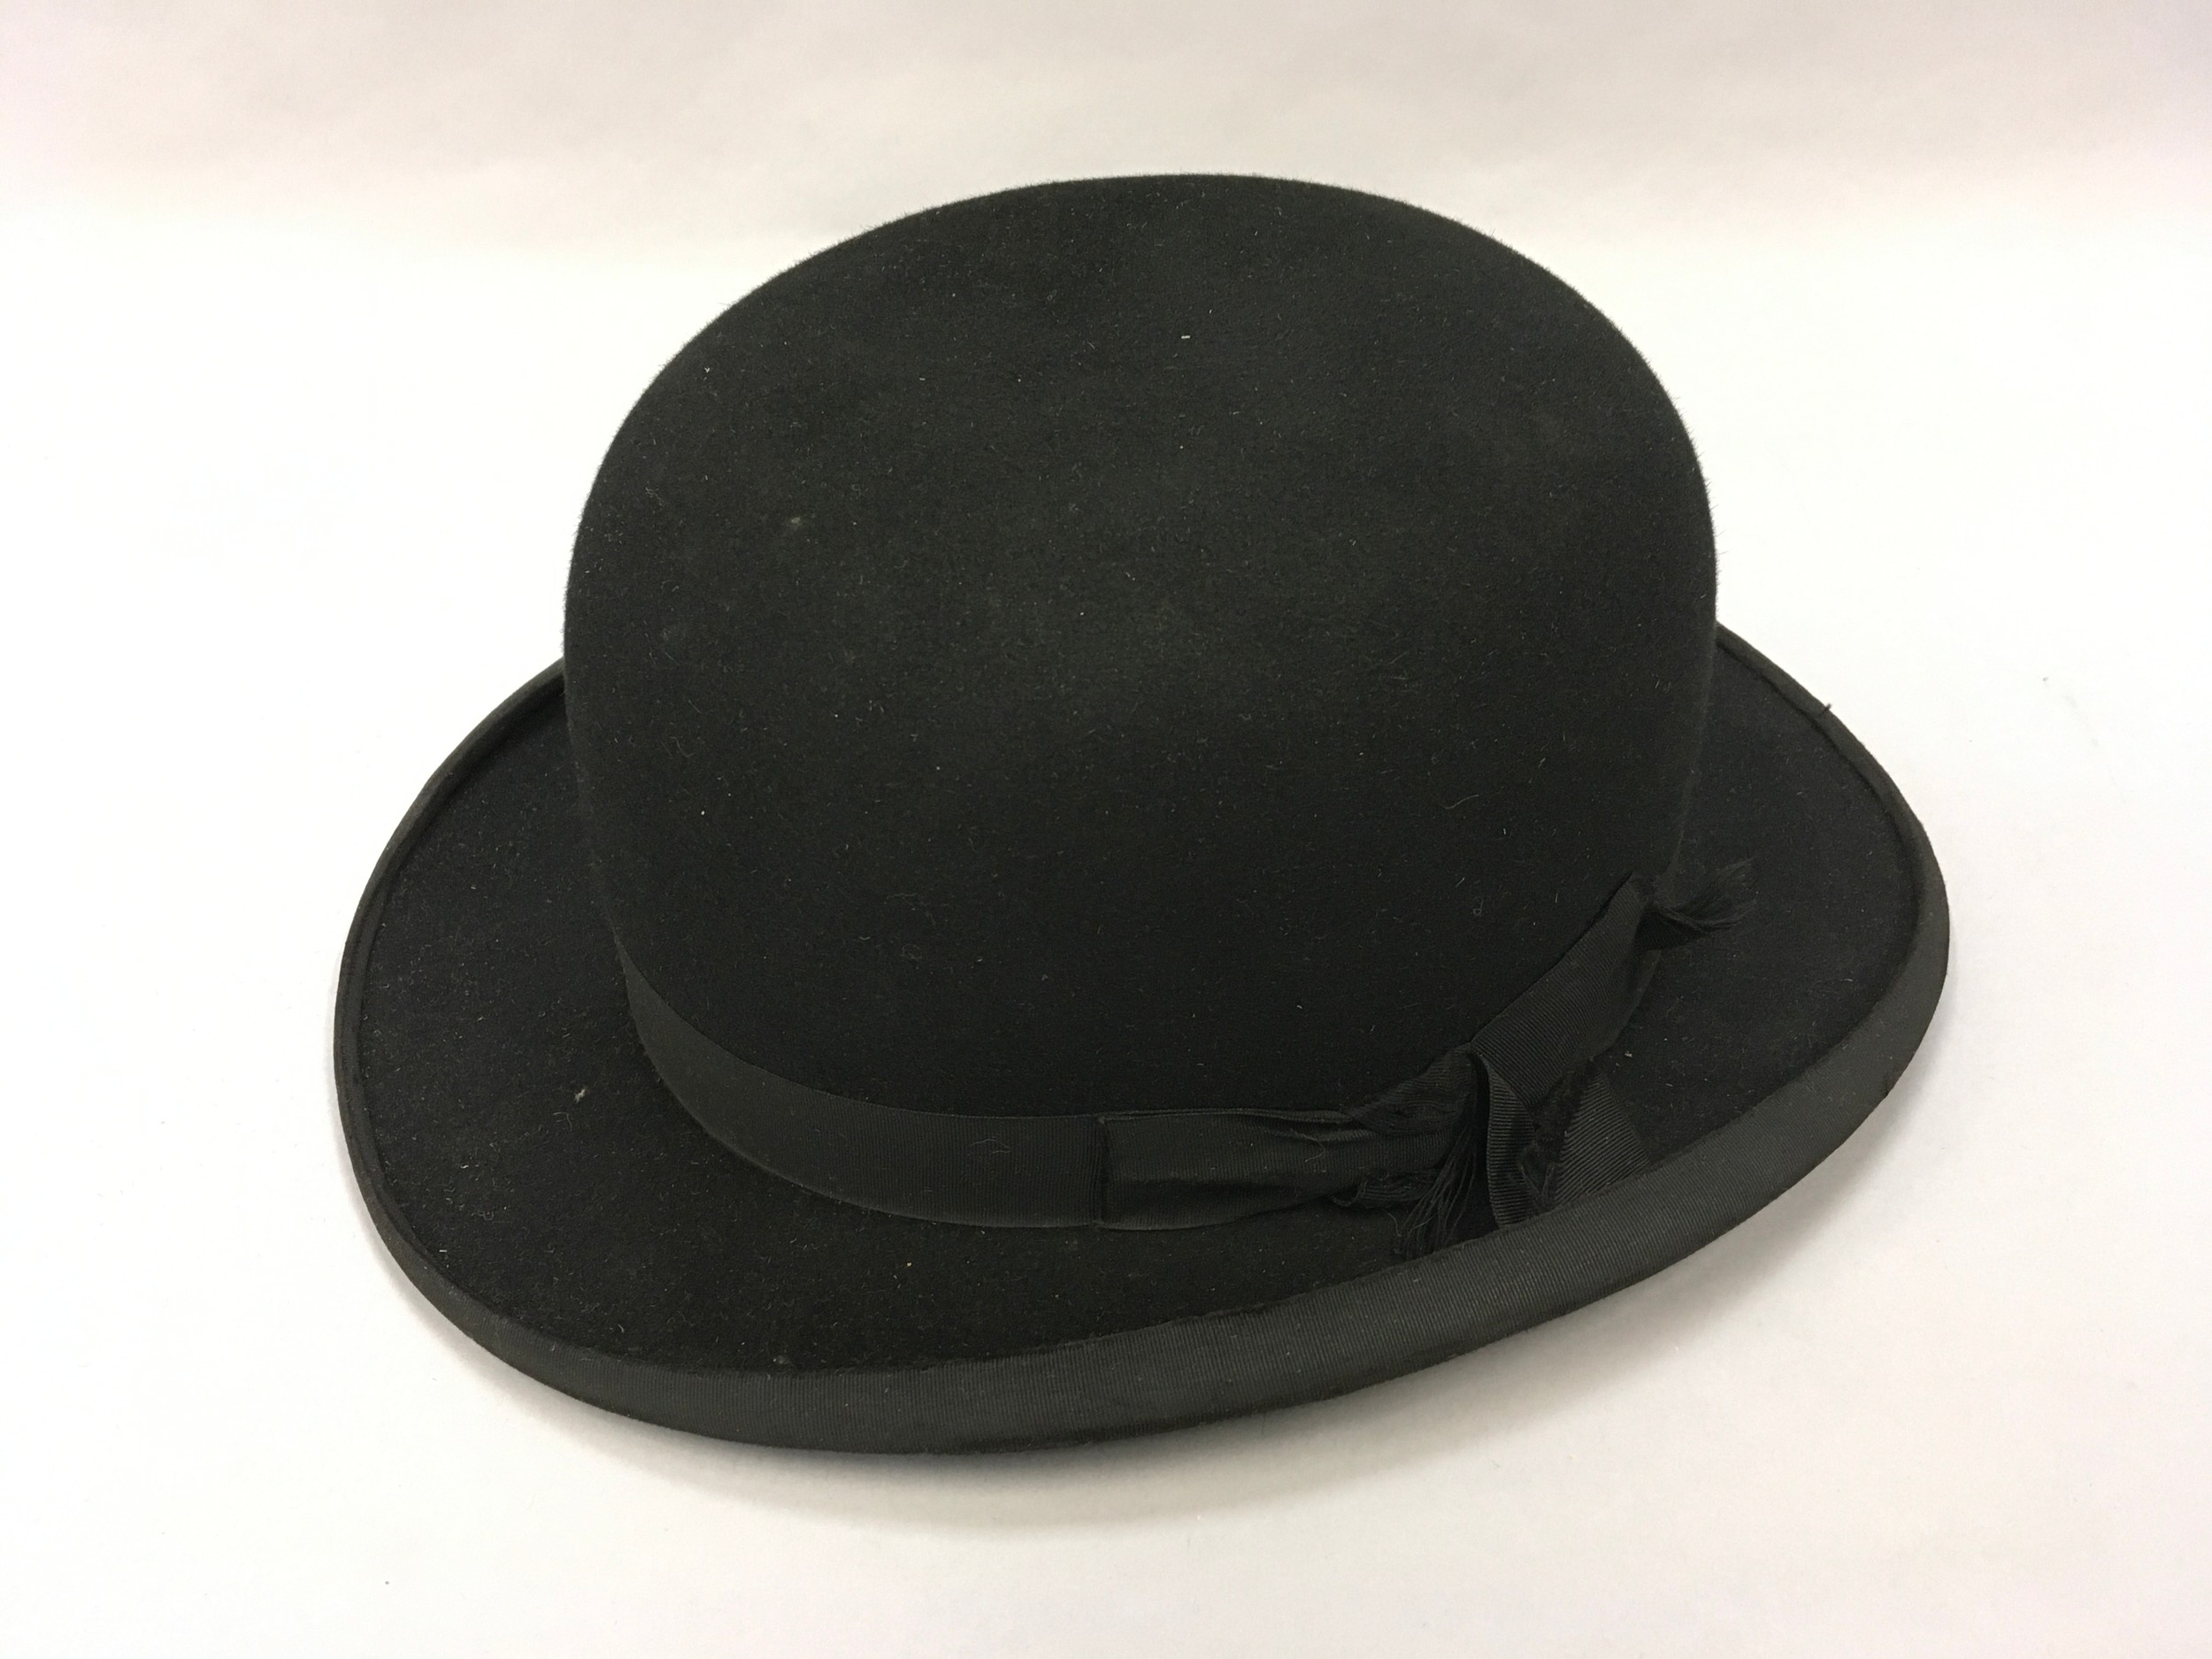 H.J. Whyatt "The Vellum" bowler hat with box marked "Moores, British Made". - Image 2 of 7